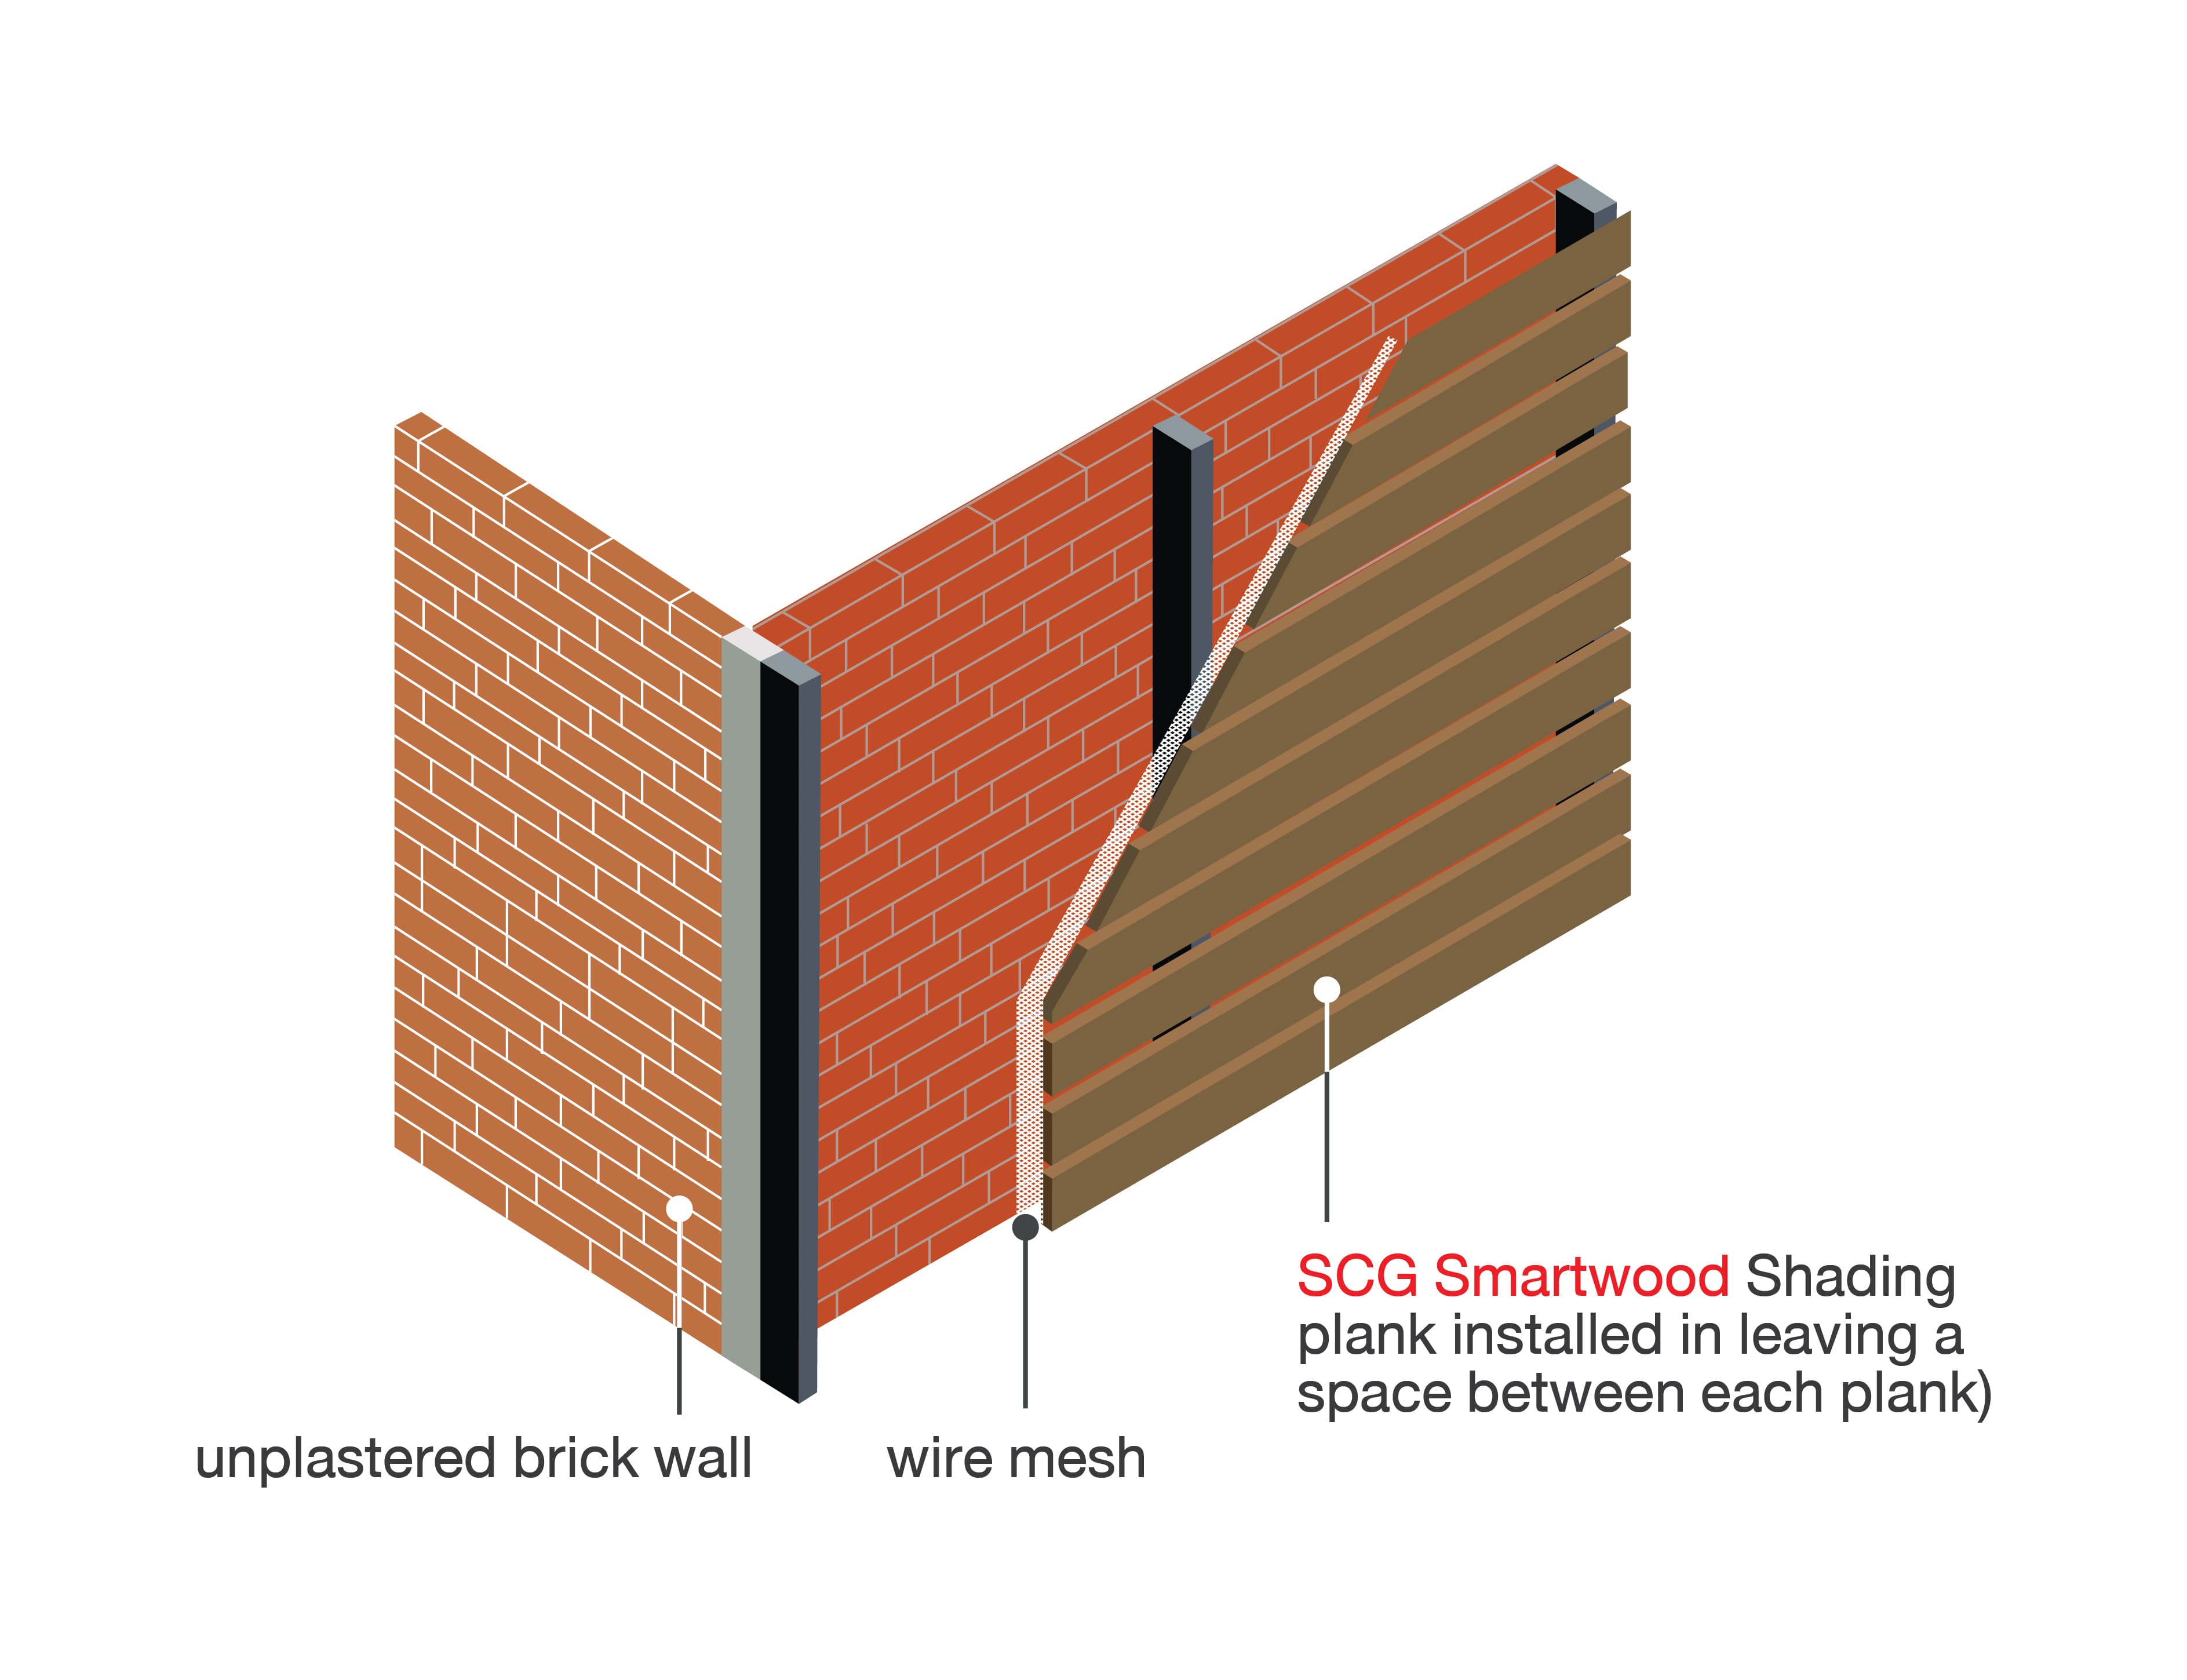 Brick wall cover with lattice panels and steel framing